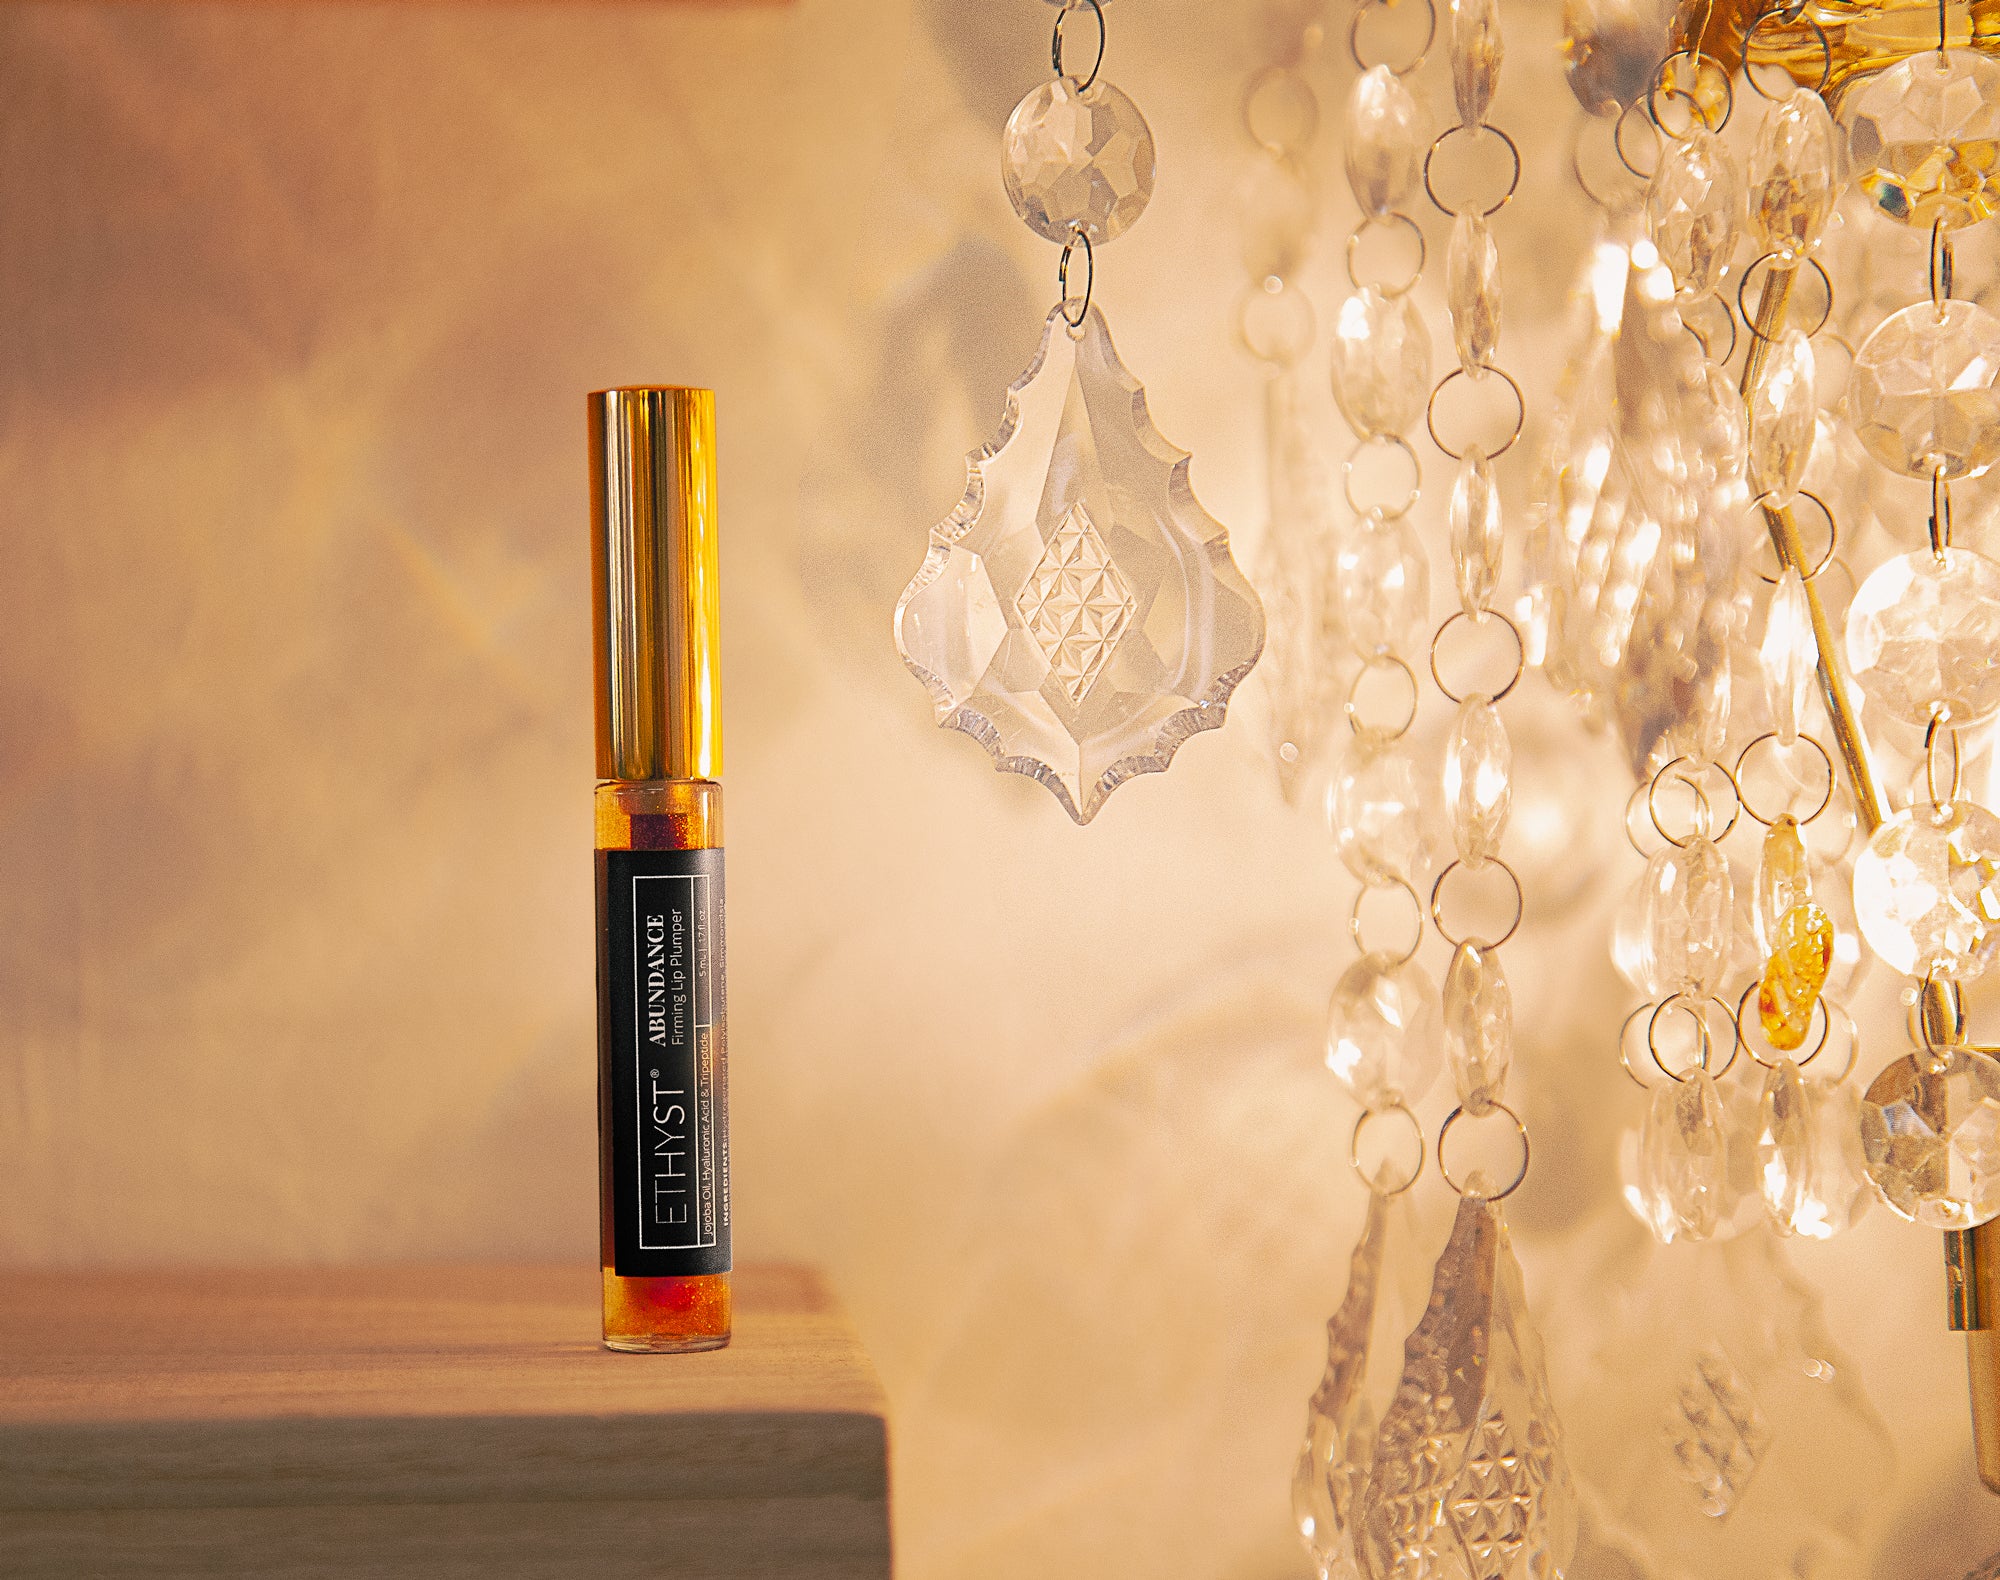 ETHYST® Abundance Firming Lip Plumper™ contains two active ingredients that help to create volume and enhance the appearance of your lips. Found at Champagne Apothecary in Westfield, Massachusetts on School Street or the online shop.